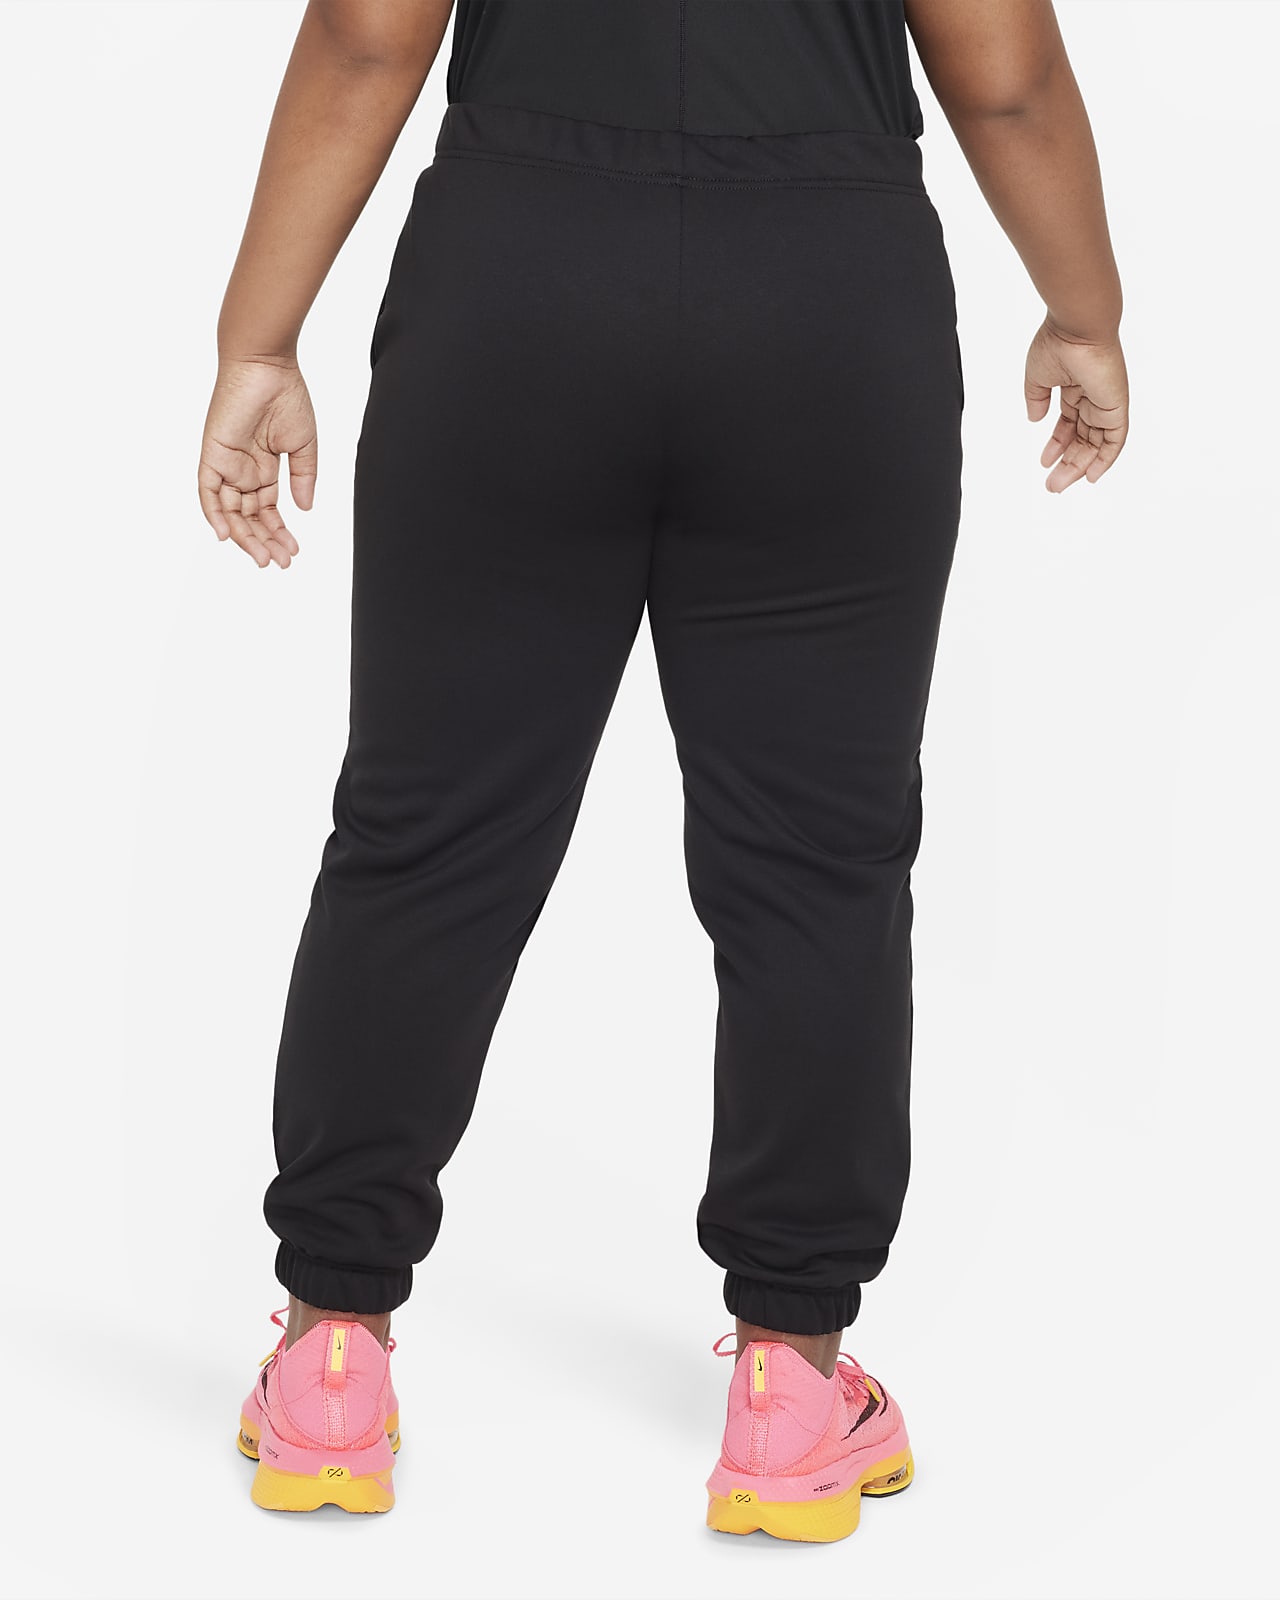 Dragon Fit Joggers for Women with Pockets,High Waist India